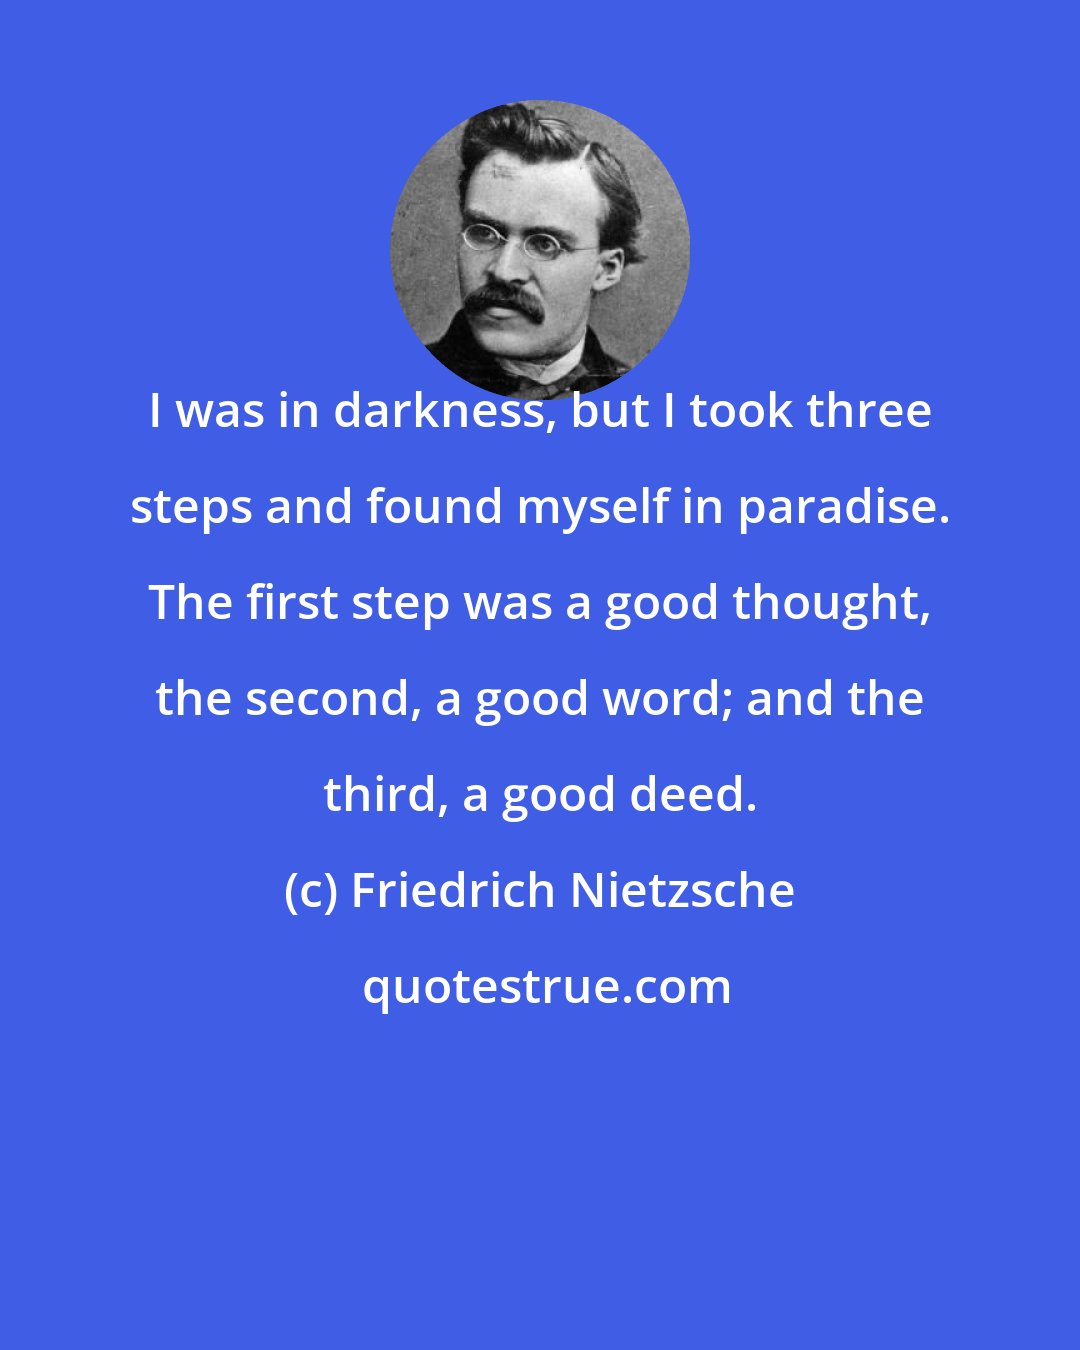 Friedrich Nietzsche: I was in darkness, but I took three steps and found myself in paradise. The first step was a good thought, the second, a good word; and the third, a good deed.